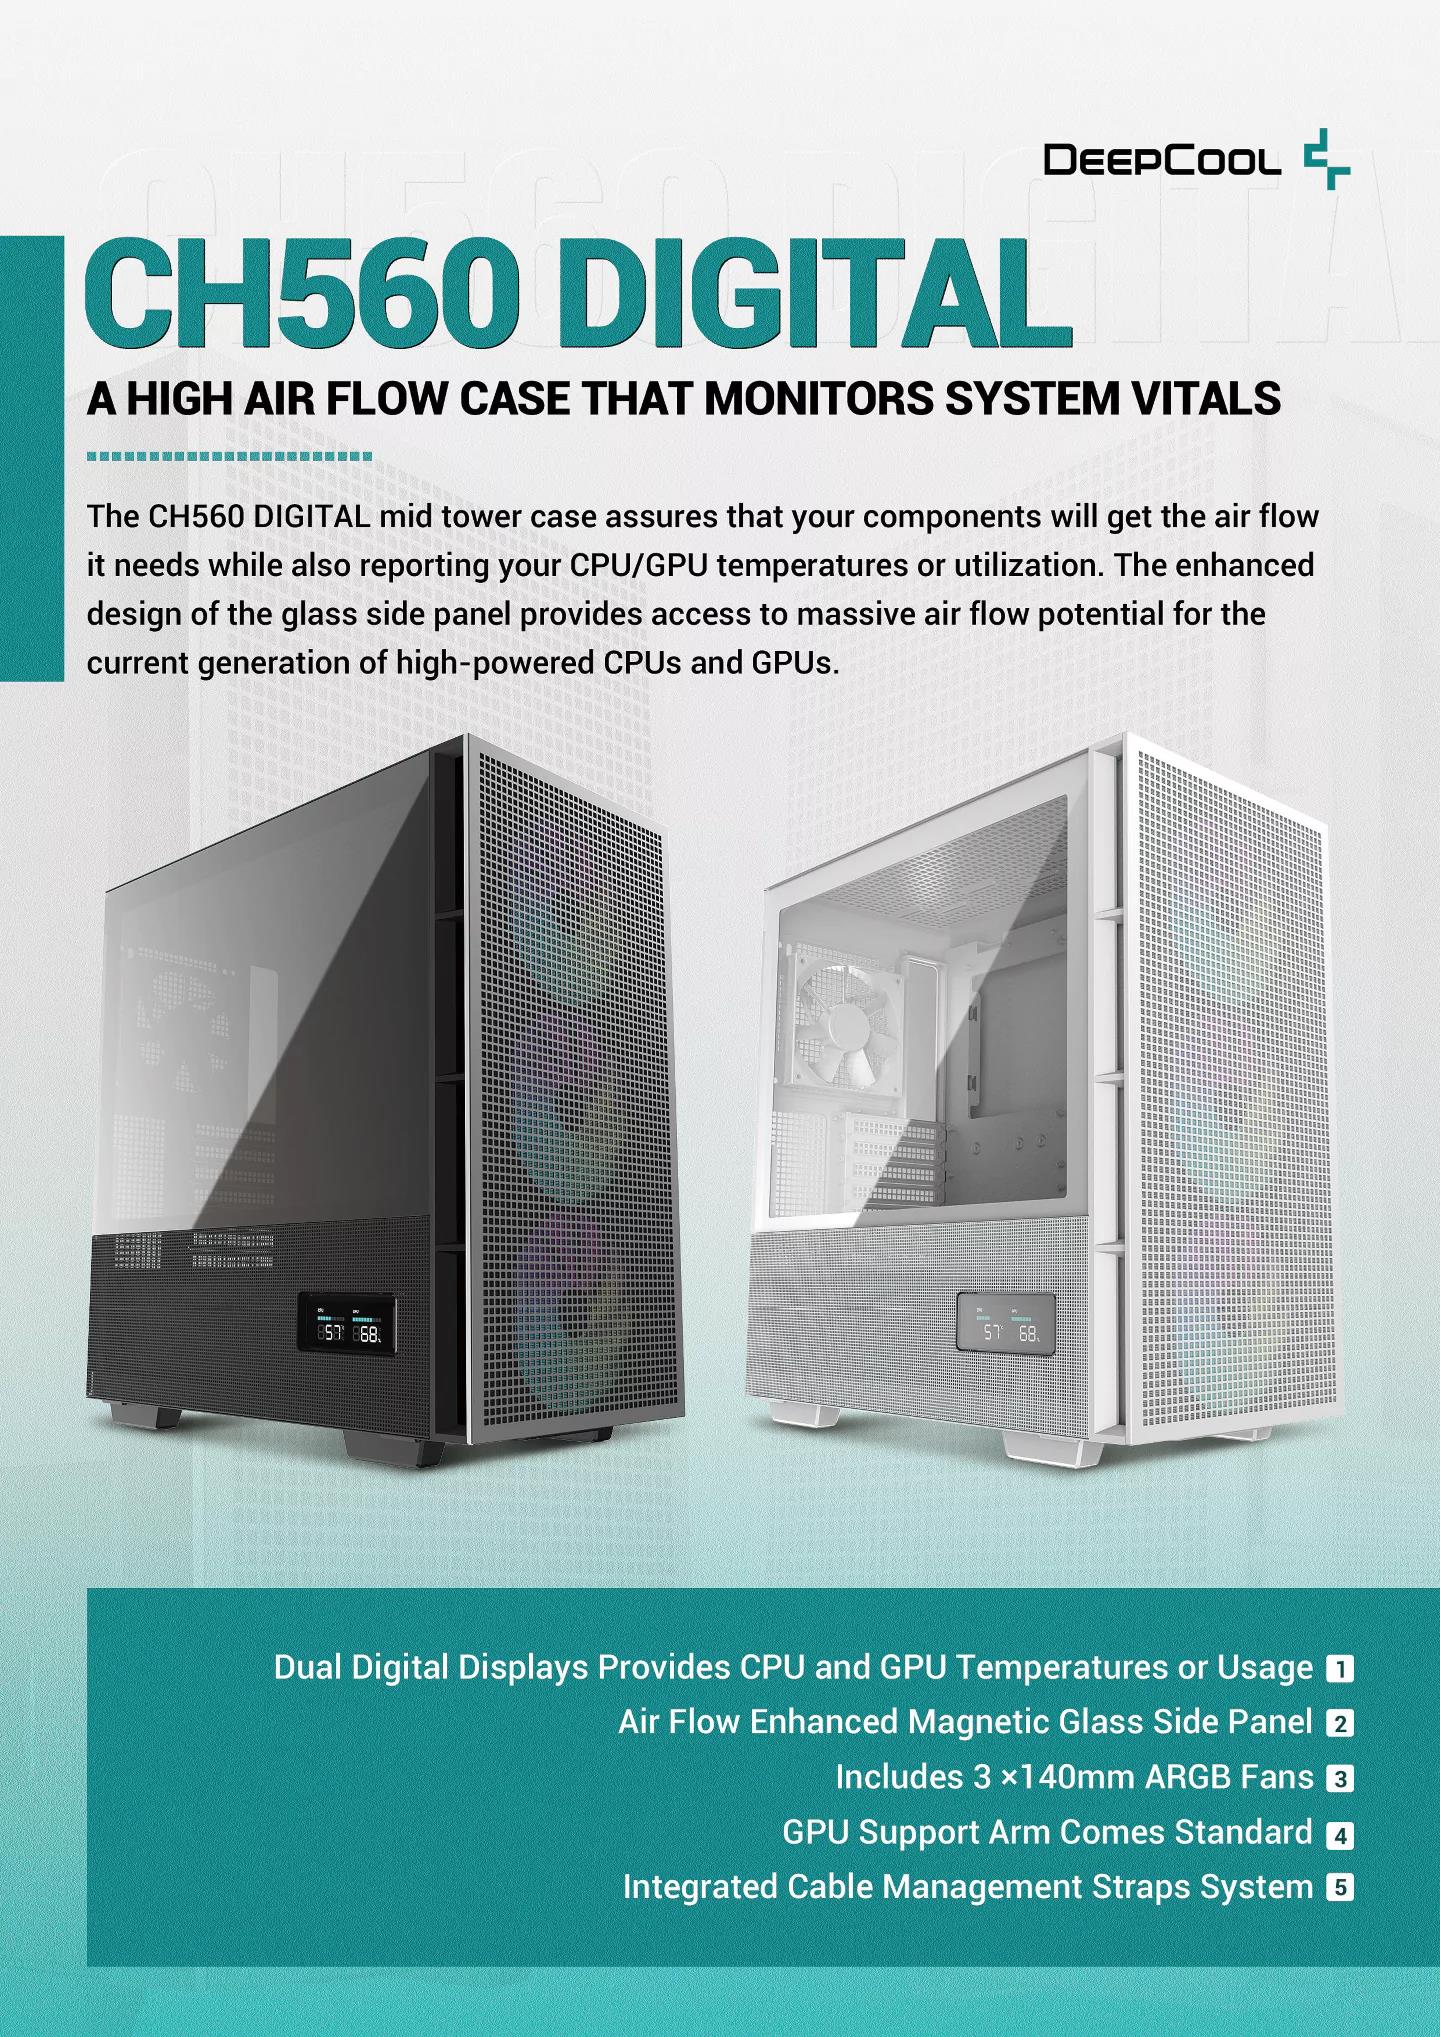 A large marketing image providing additional information about the product DeepCool CH560 Digital Mid Tower Case - Black - Additional alt info not provided